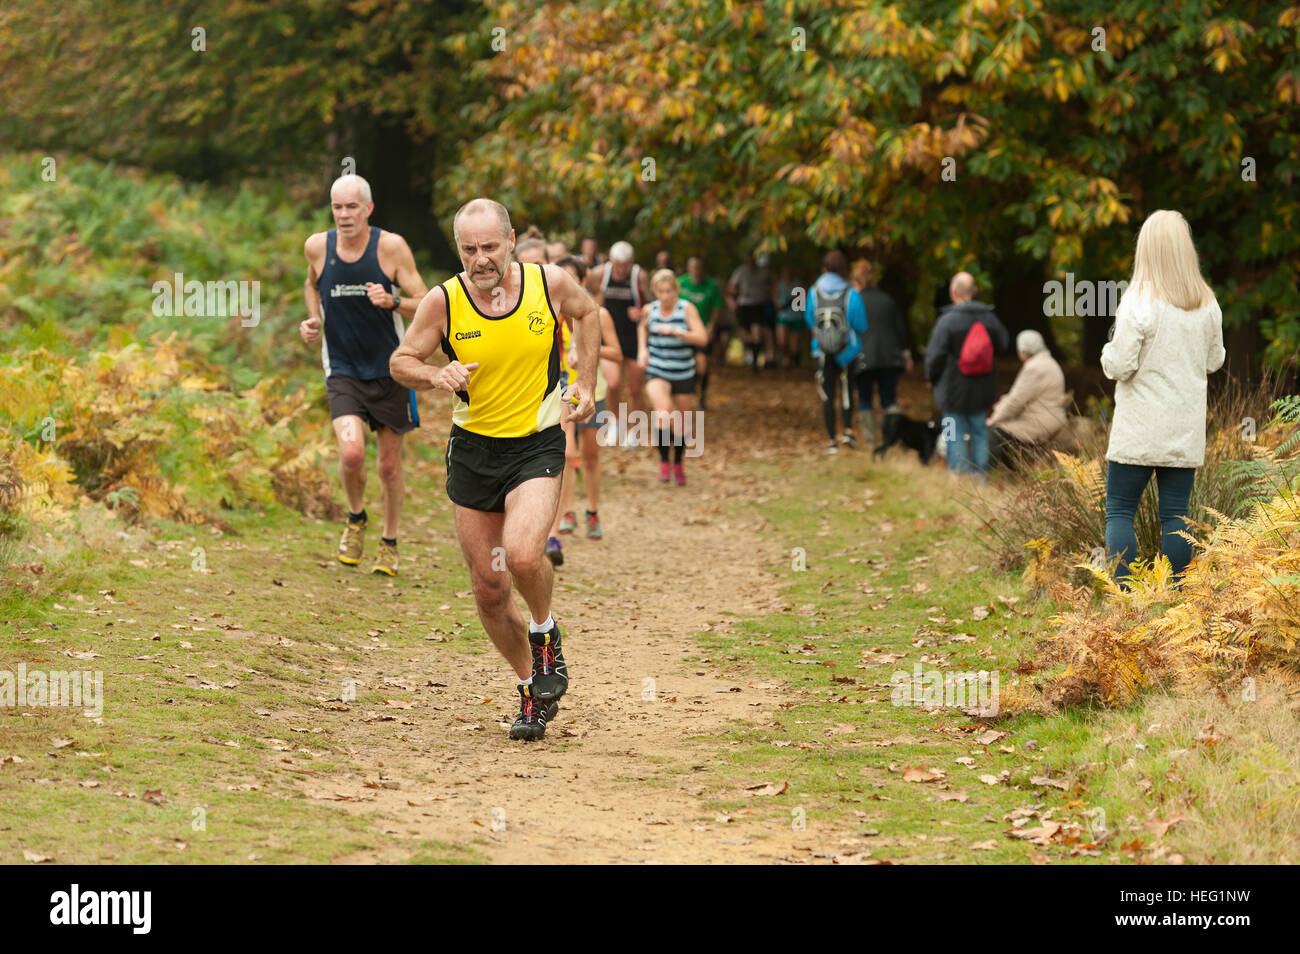 First race of Season Kent fitness running league race in Knole Park massive field cross country 561 runners teams Stock Photo